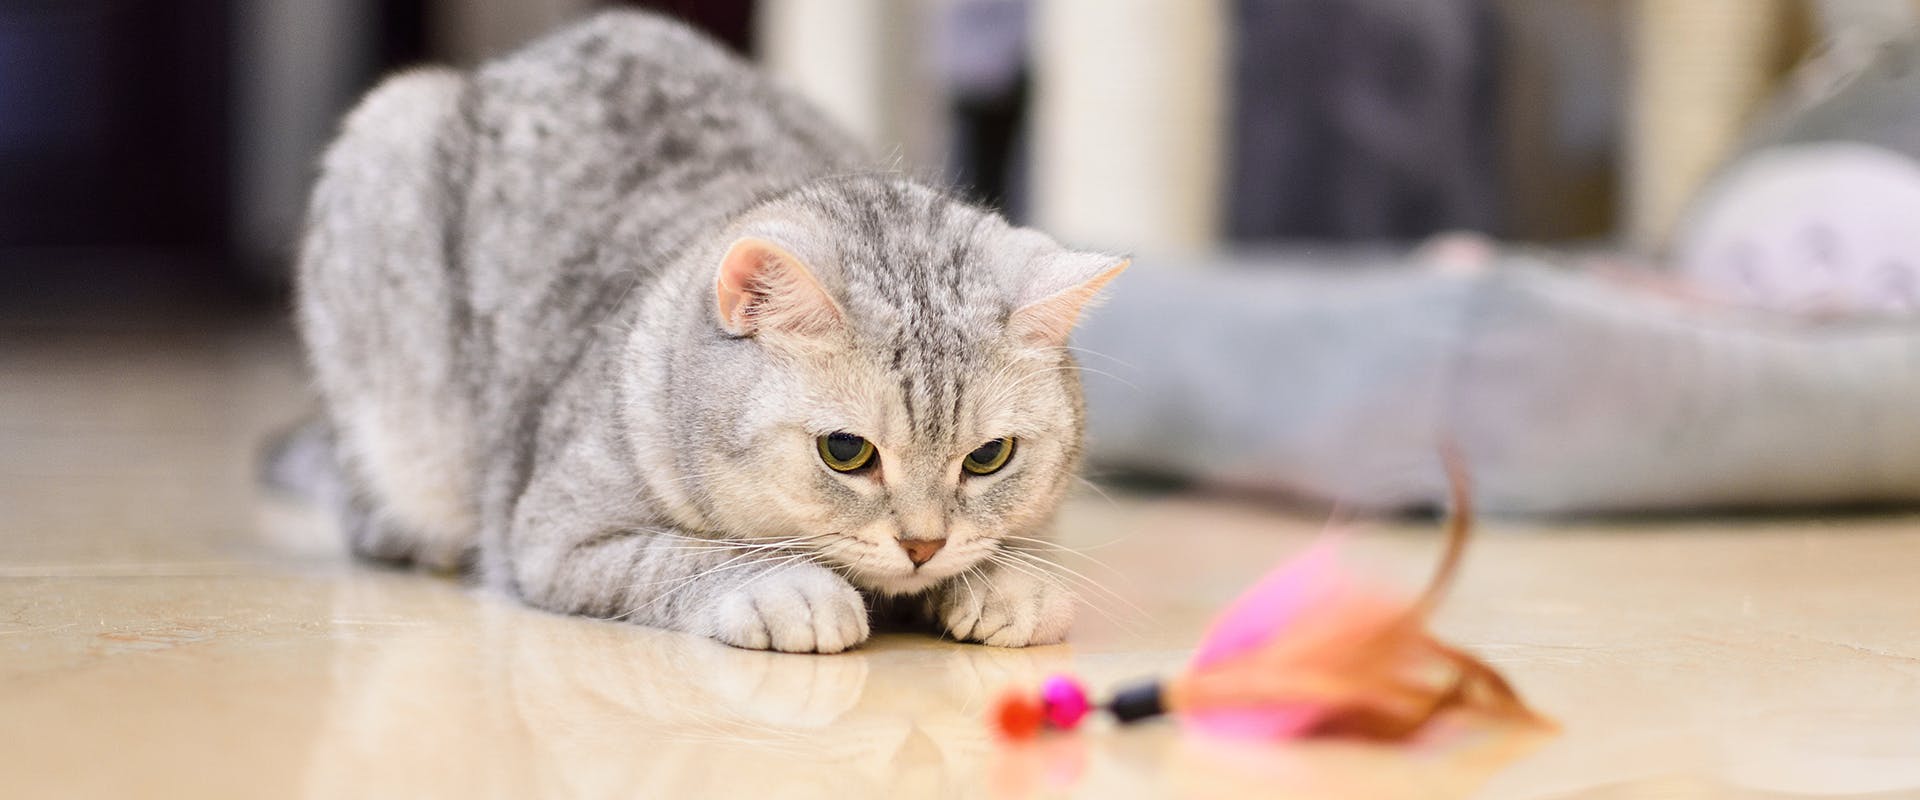 A cat playing with a feathered toy, ready to pounce